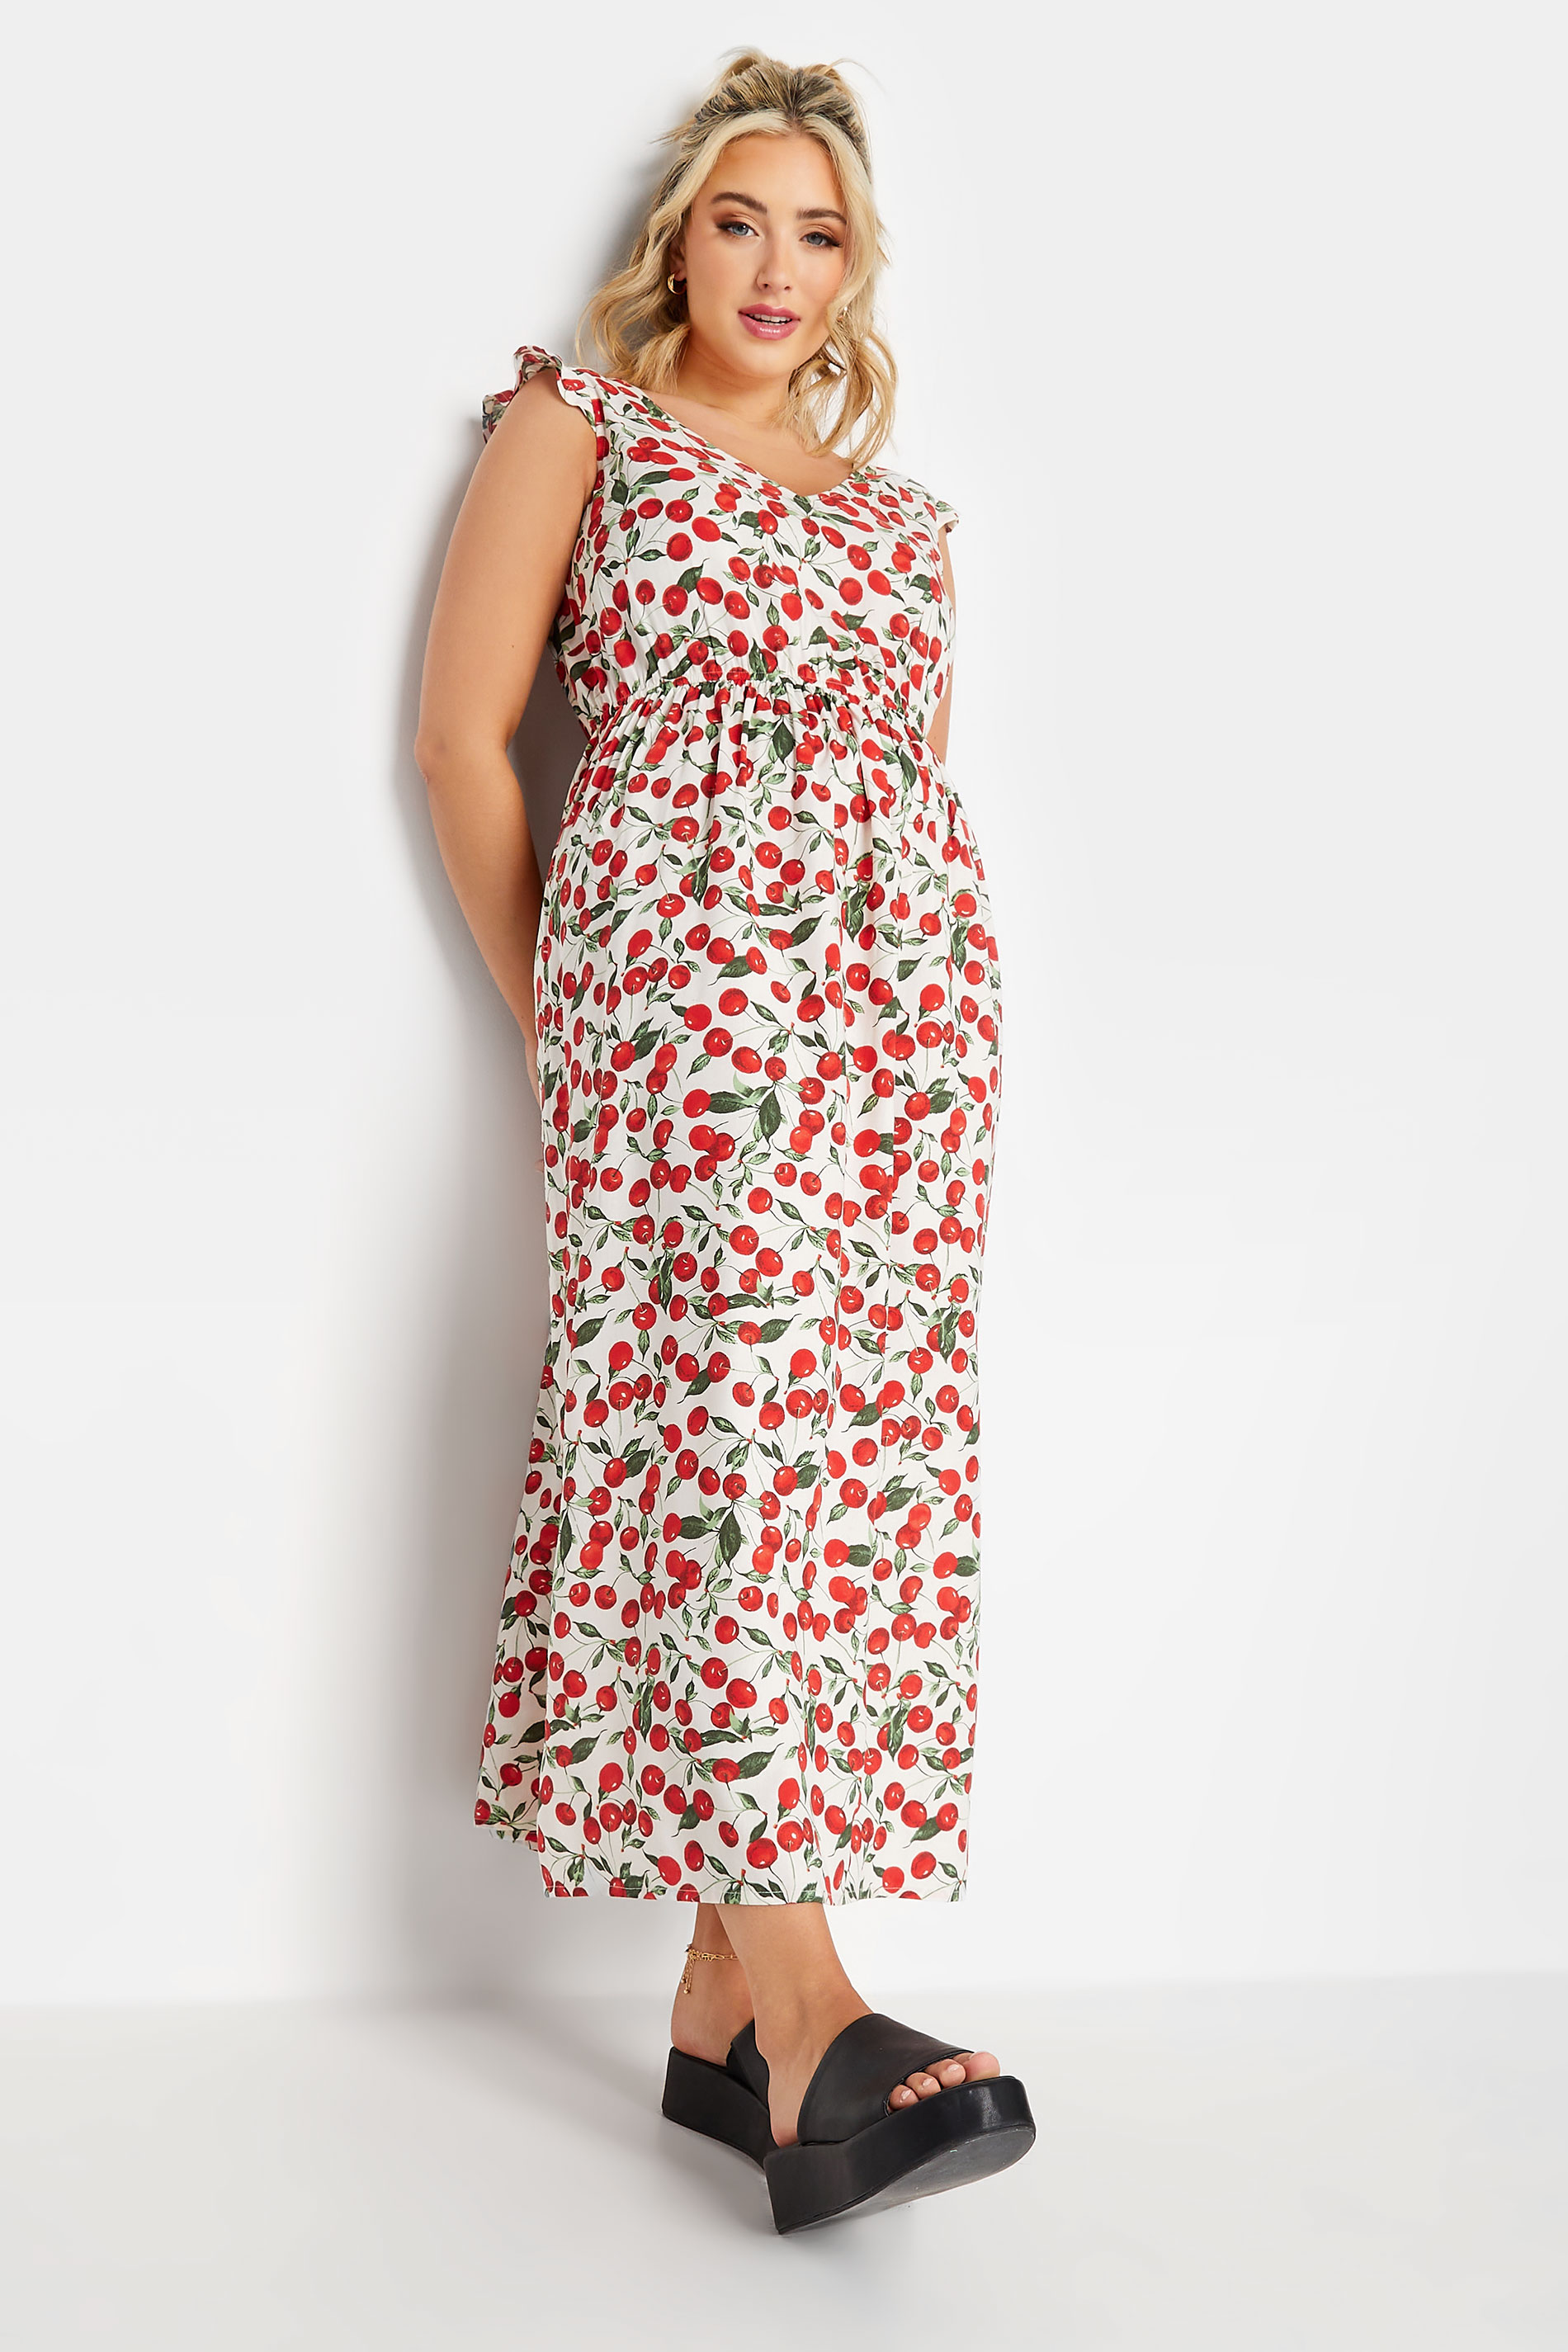 LIMITED COLLECTION Plus Size White Cherry Print Frill Maxi Dress | Yours Clothing 1